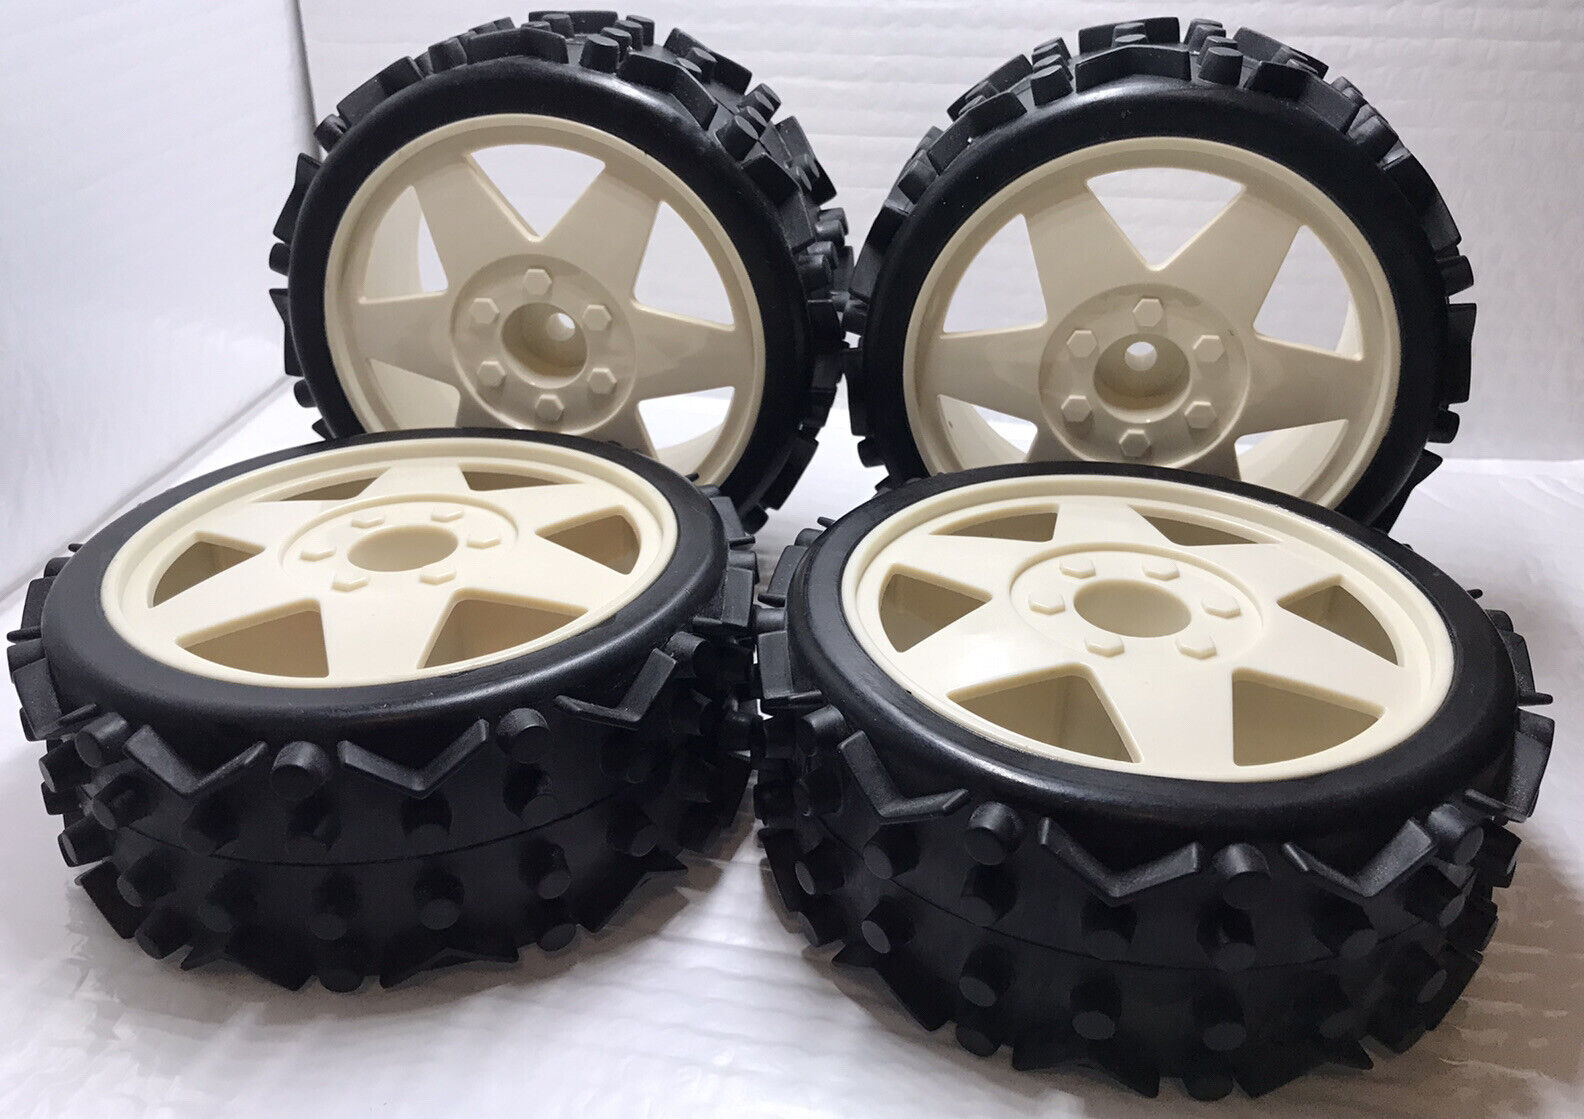 Tire Set 4PCS For Duratrax Firehammer Smartech Carson FG 1/5 Scale RC Buggy